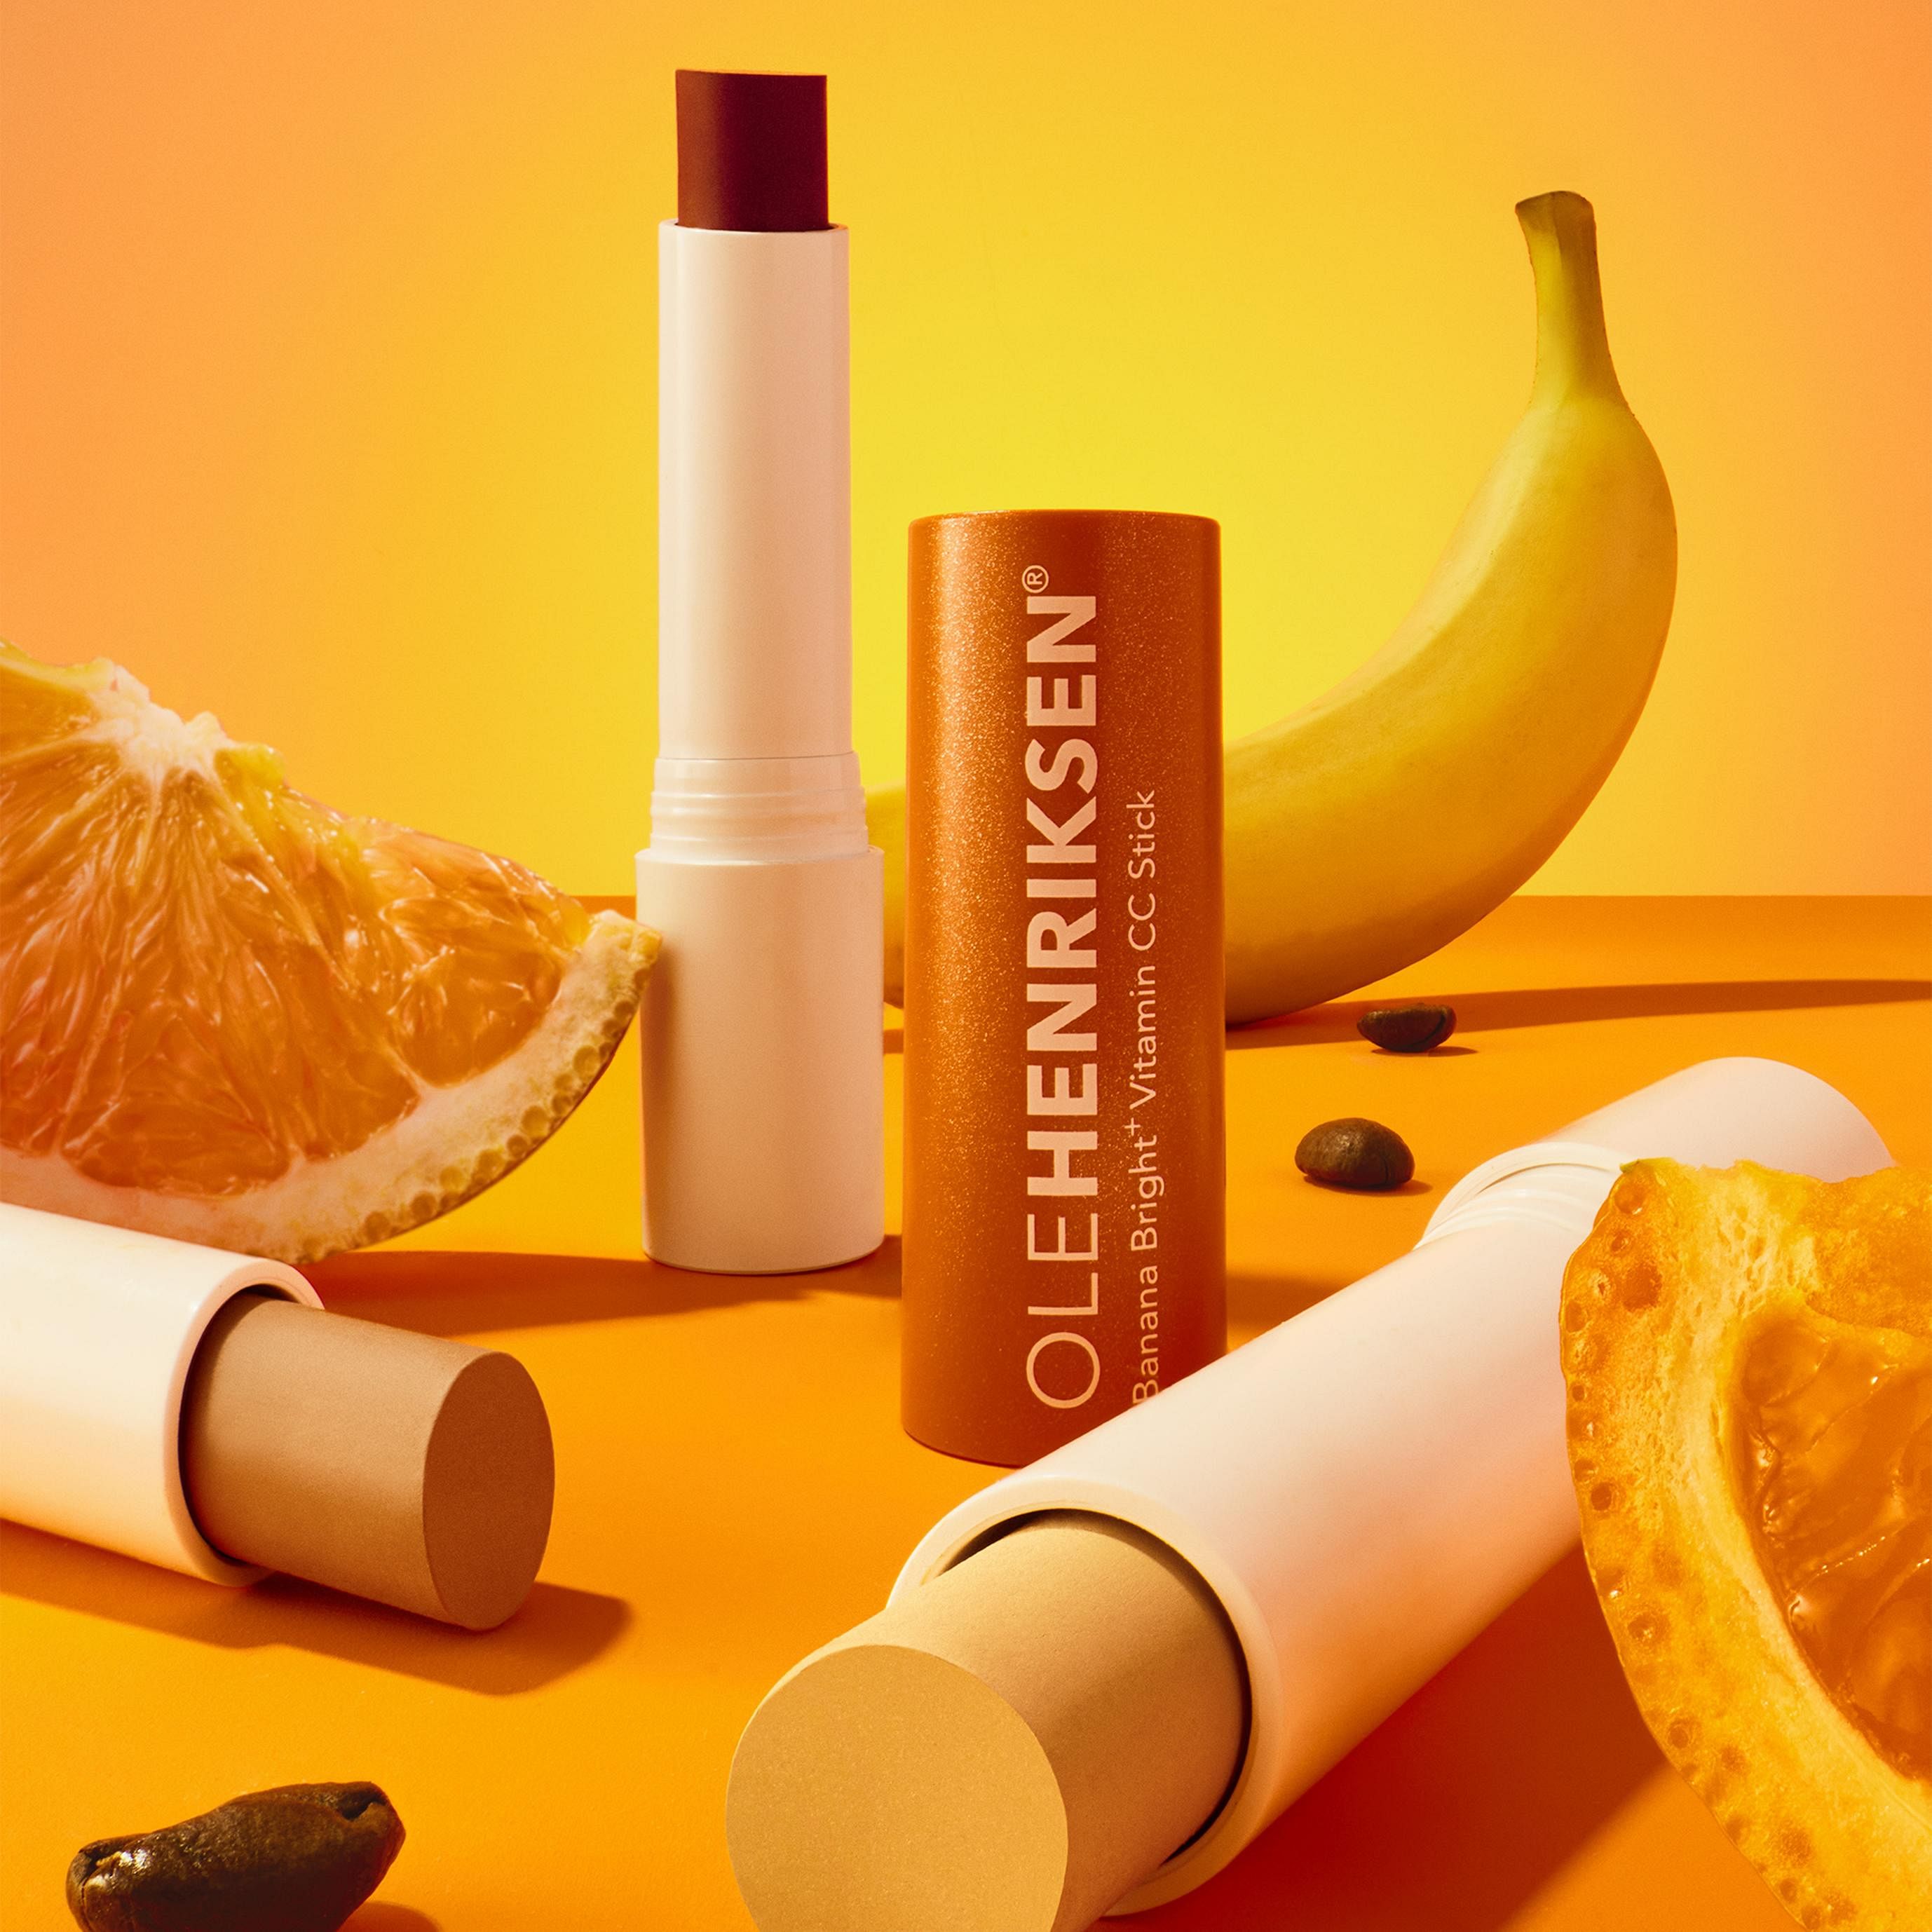 OLEHENRIKSEN Launches New and Upgraded Banana Bright+ Eye Crème